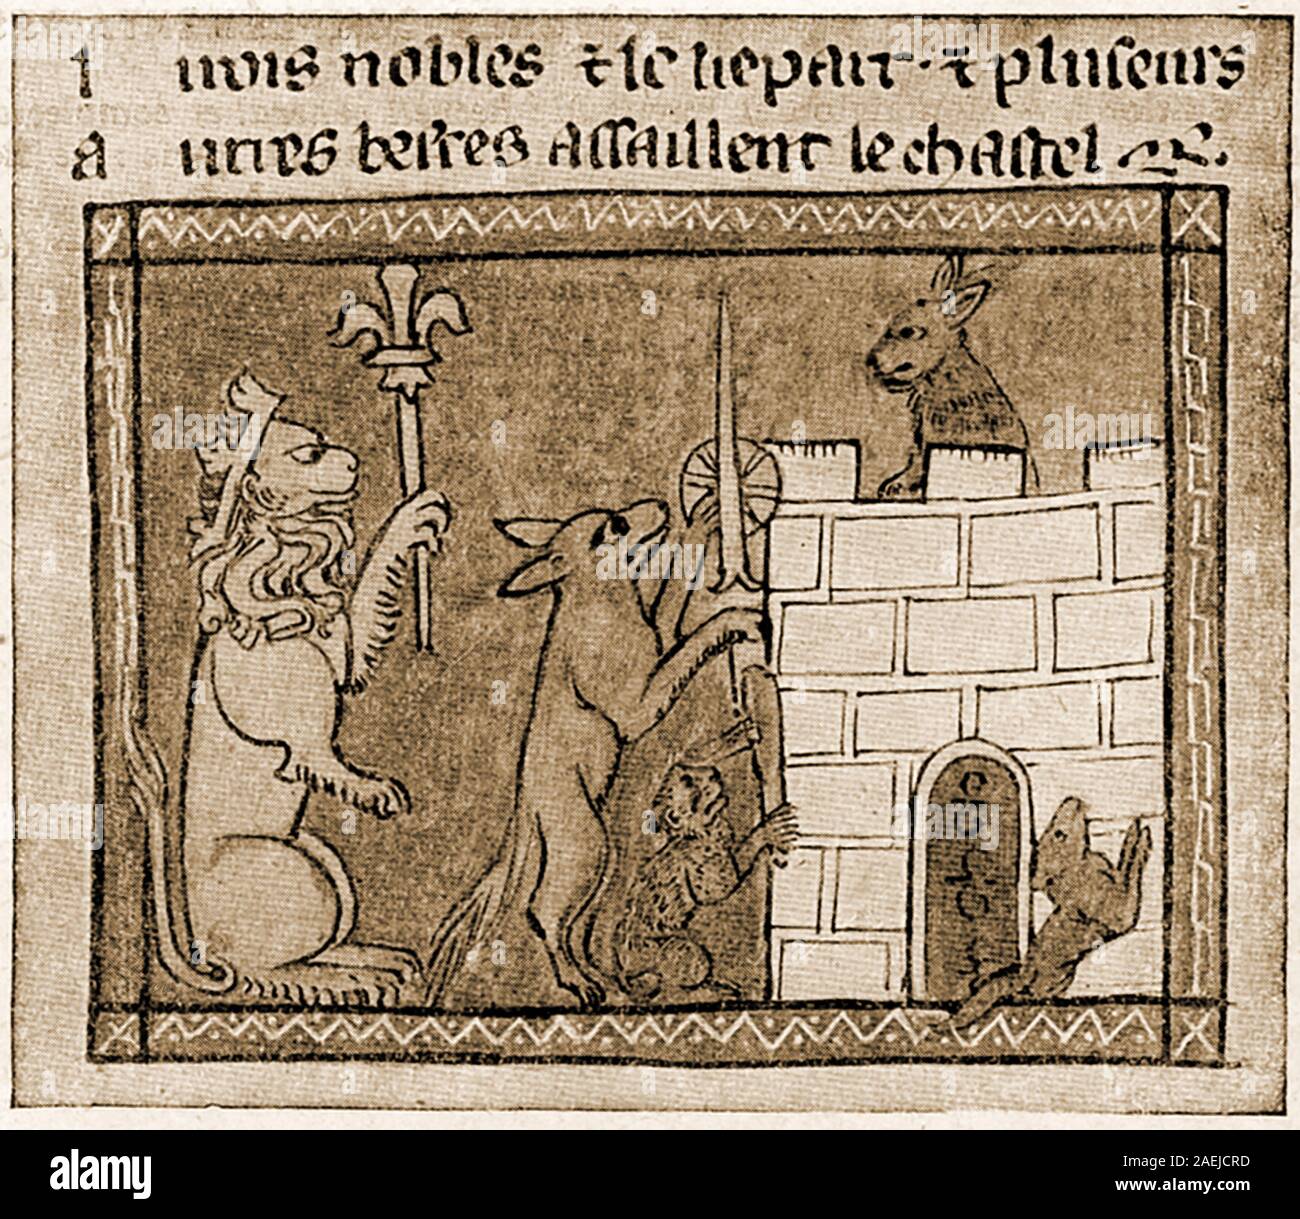 A rare old French Latin Manuscript illustration  from Roman de Renart  showing  -The leopard and several other beasts   assailing  Renart's  (Reynard the fox) Castle in a scene from the   medieval allegorical Dutch, English, French and German fables which occur throughot history from  the 12th century,   throughout the Late Middle Ages, and in chapbooks  etc throughout the Early Modern period. Stock Photo